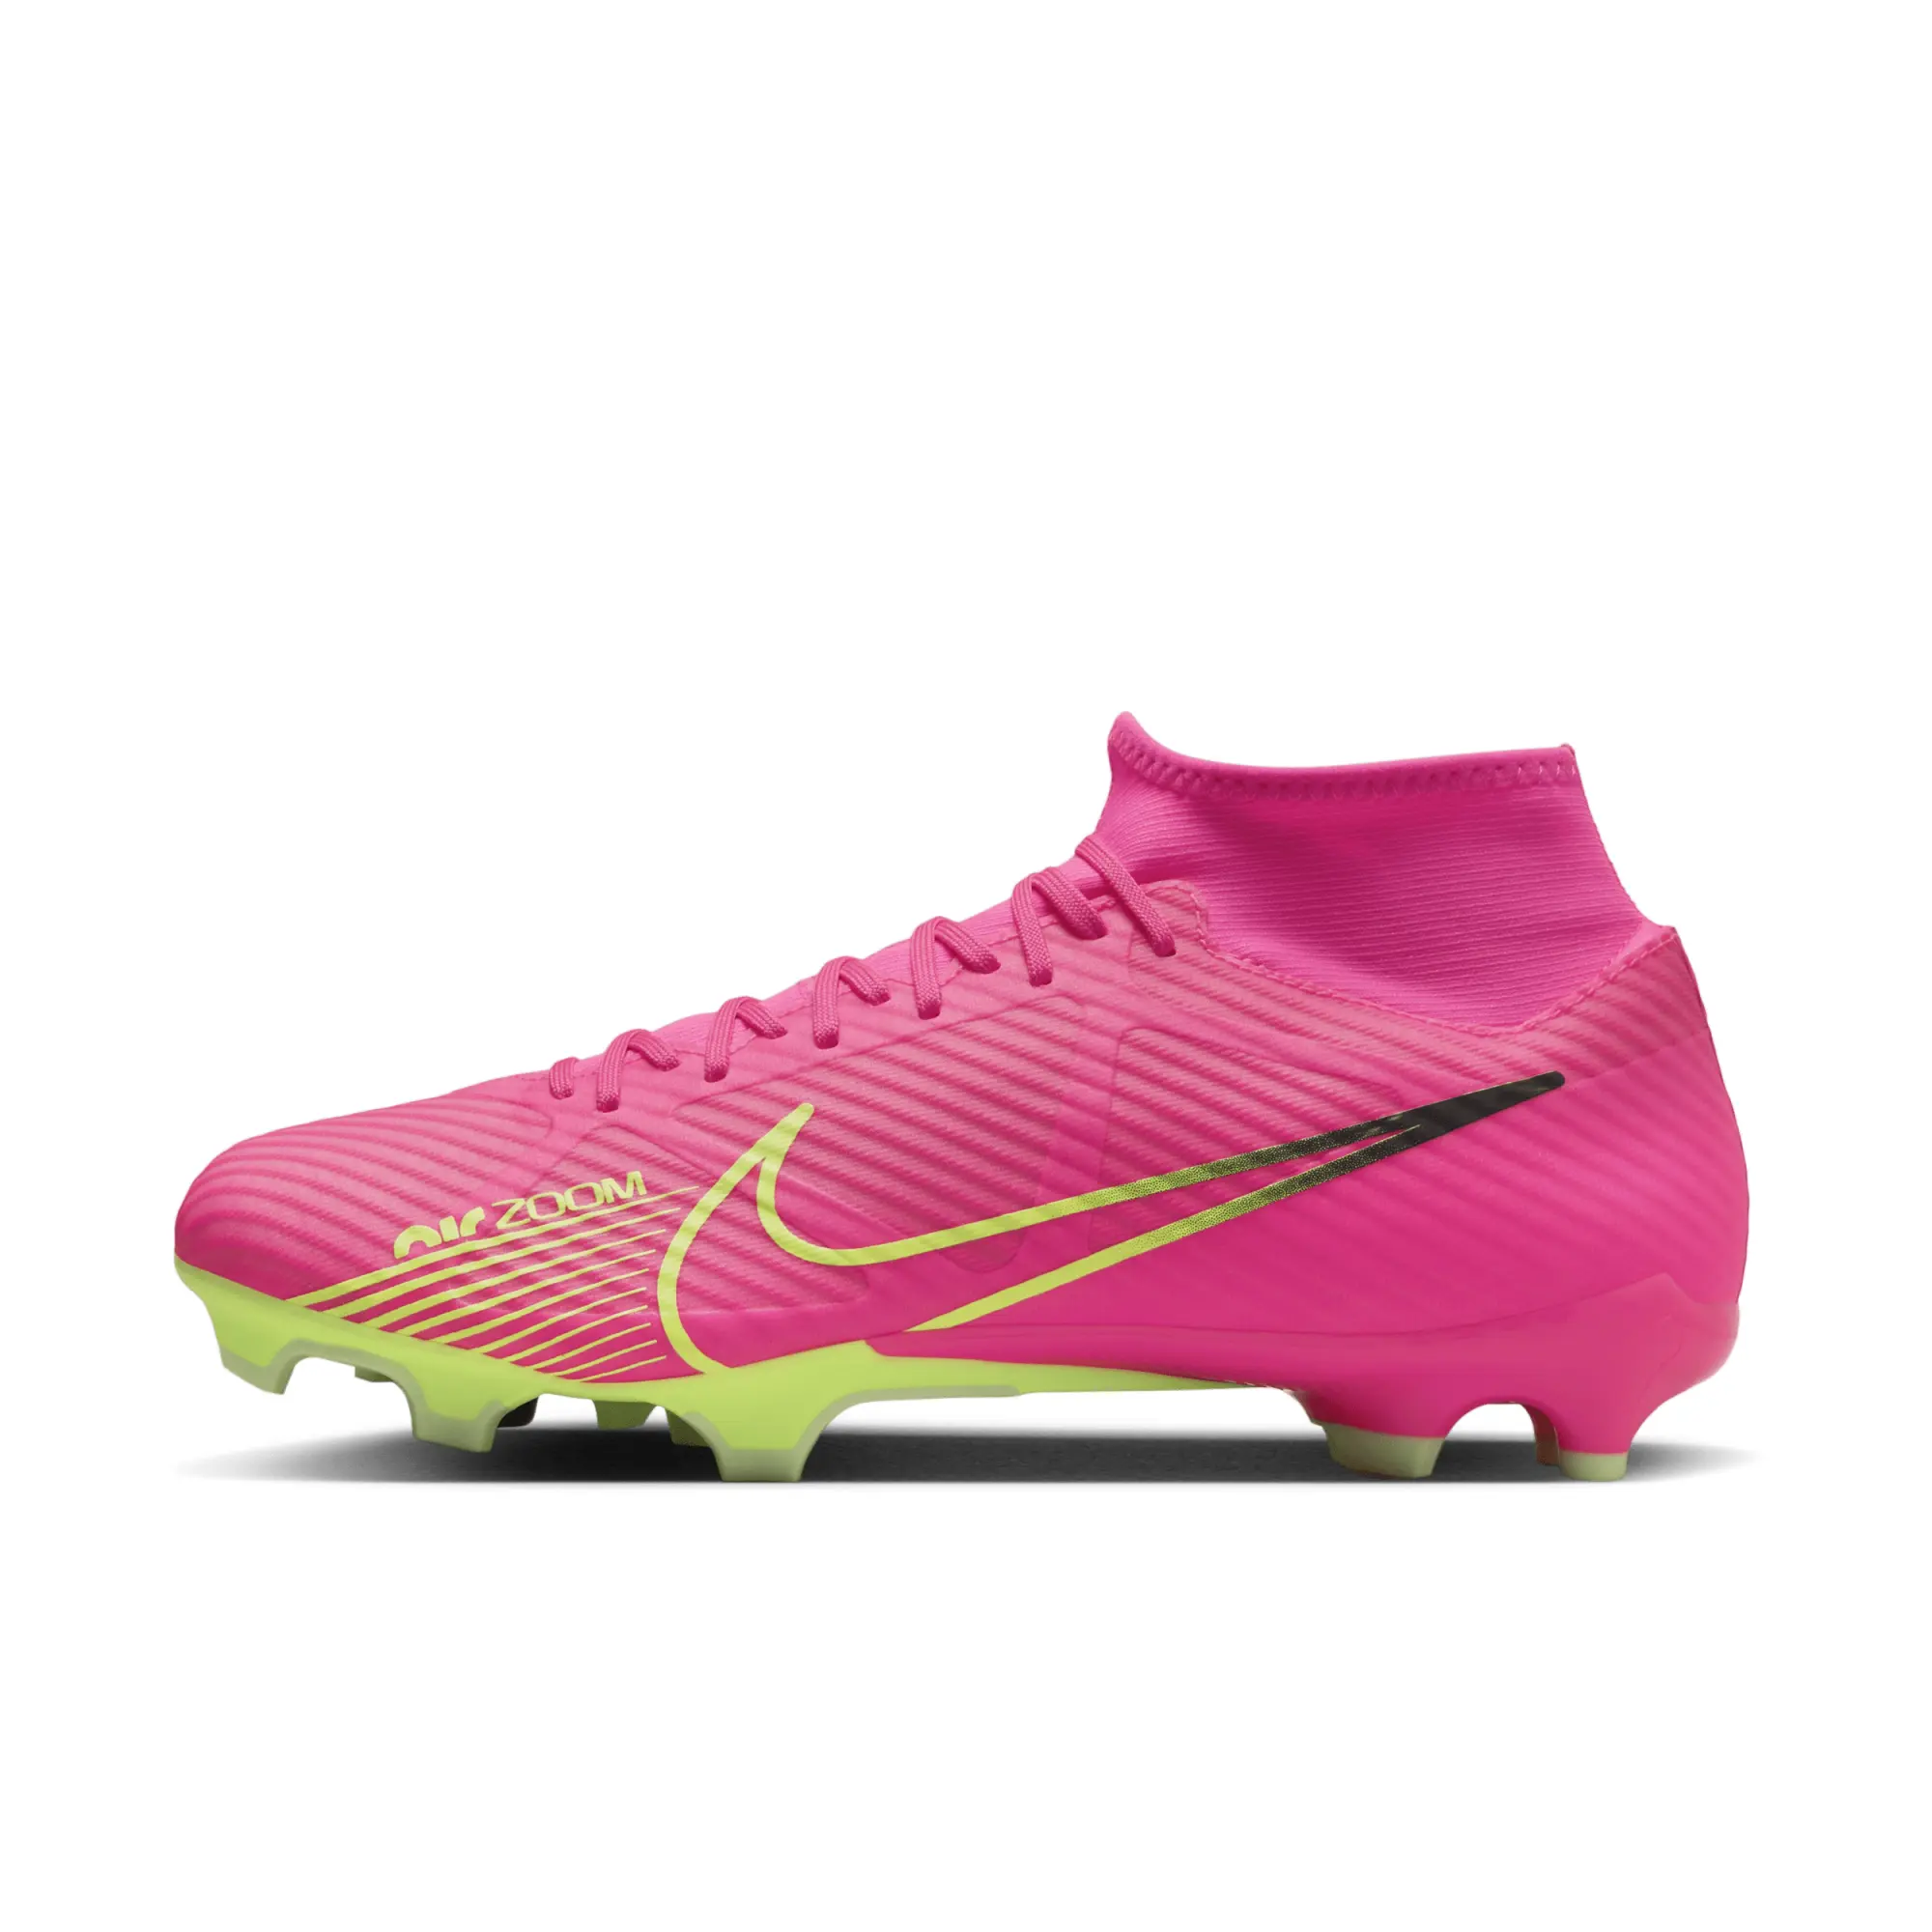 Nike Zoom Mercurial Superfly 9 Academy MG Multi-Ground Football Boot - Pink